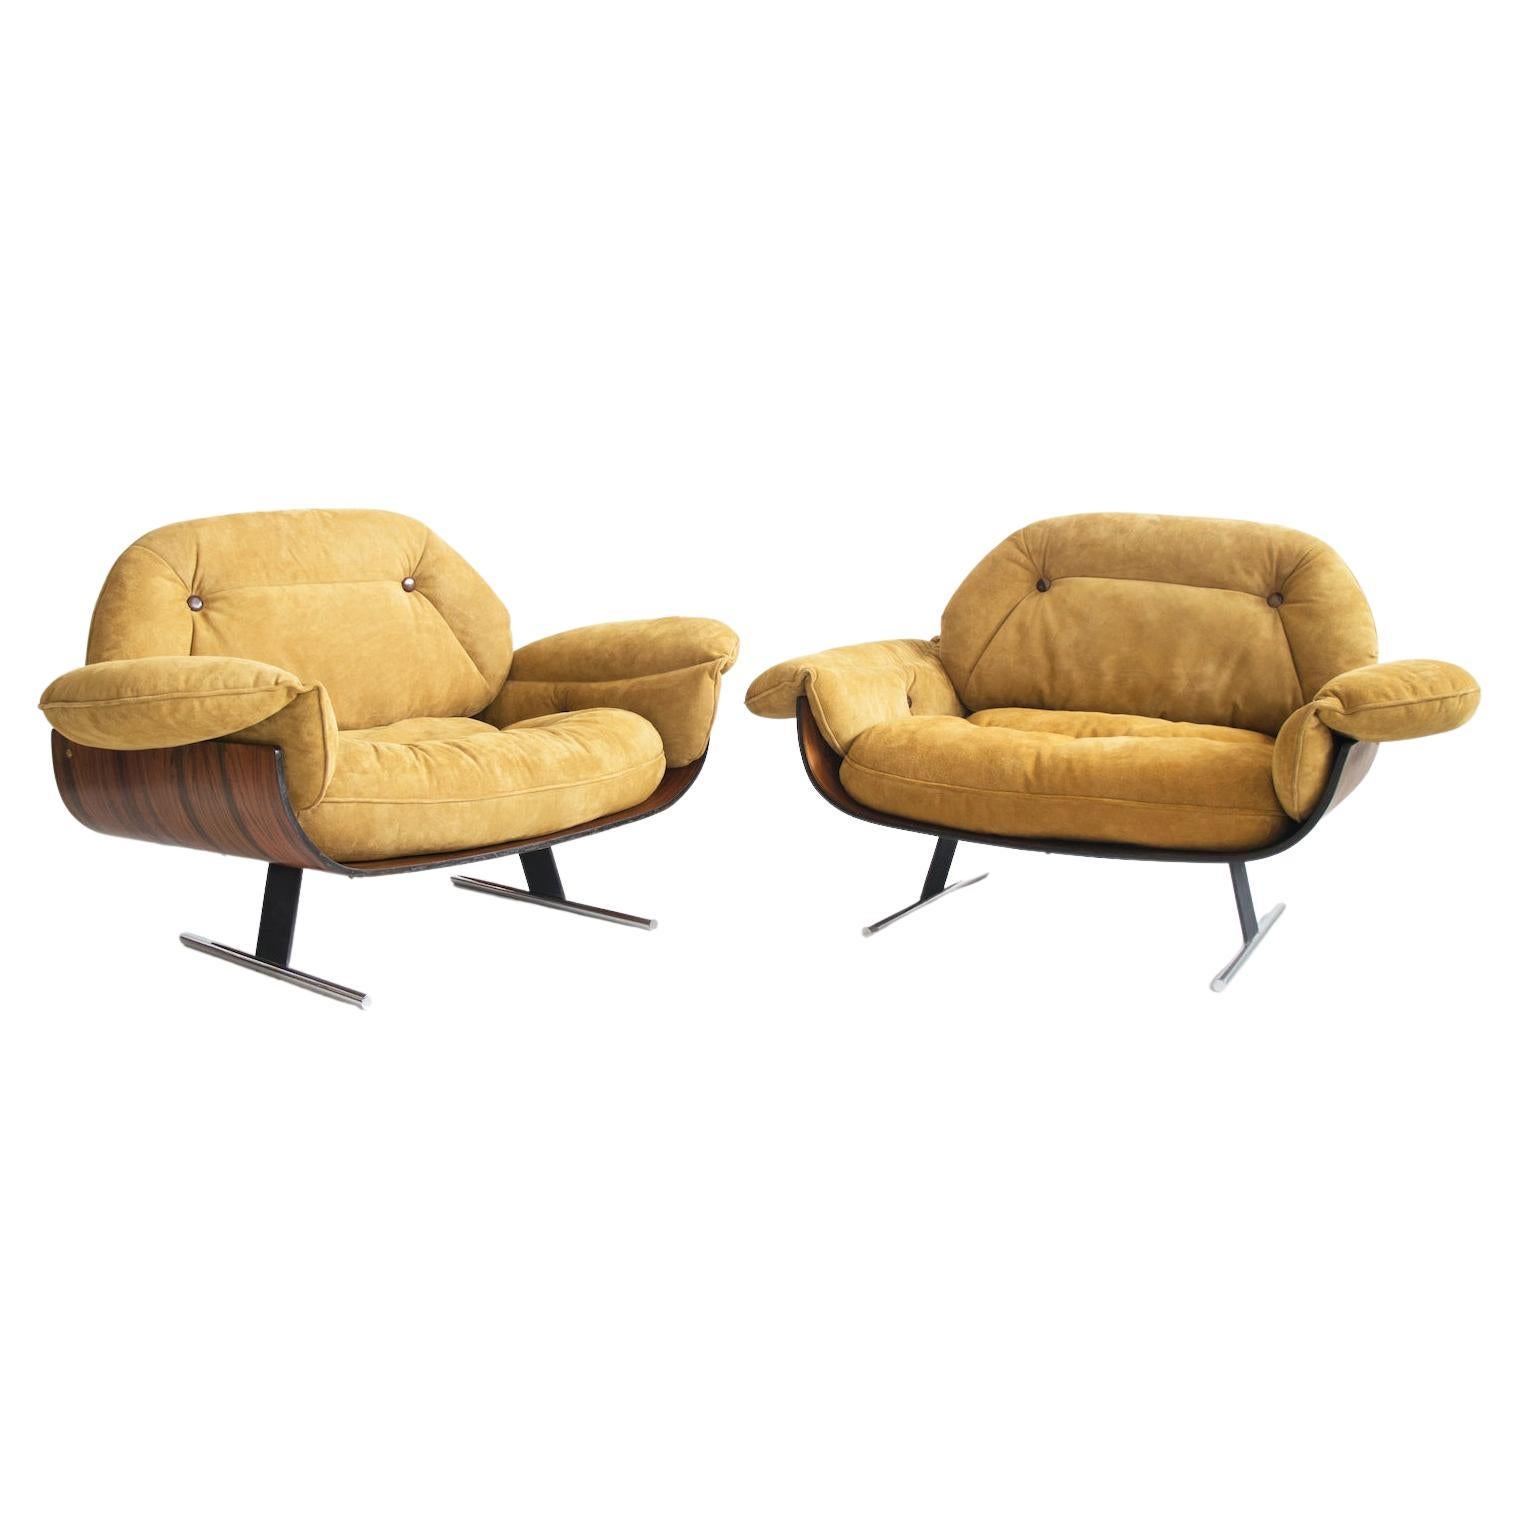 Pair of Jorge Zalszupin Presidential Armchairs of Hardwood and Suede